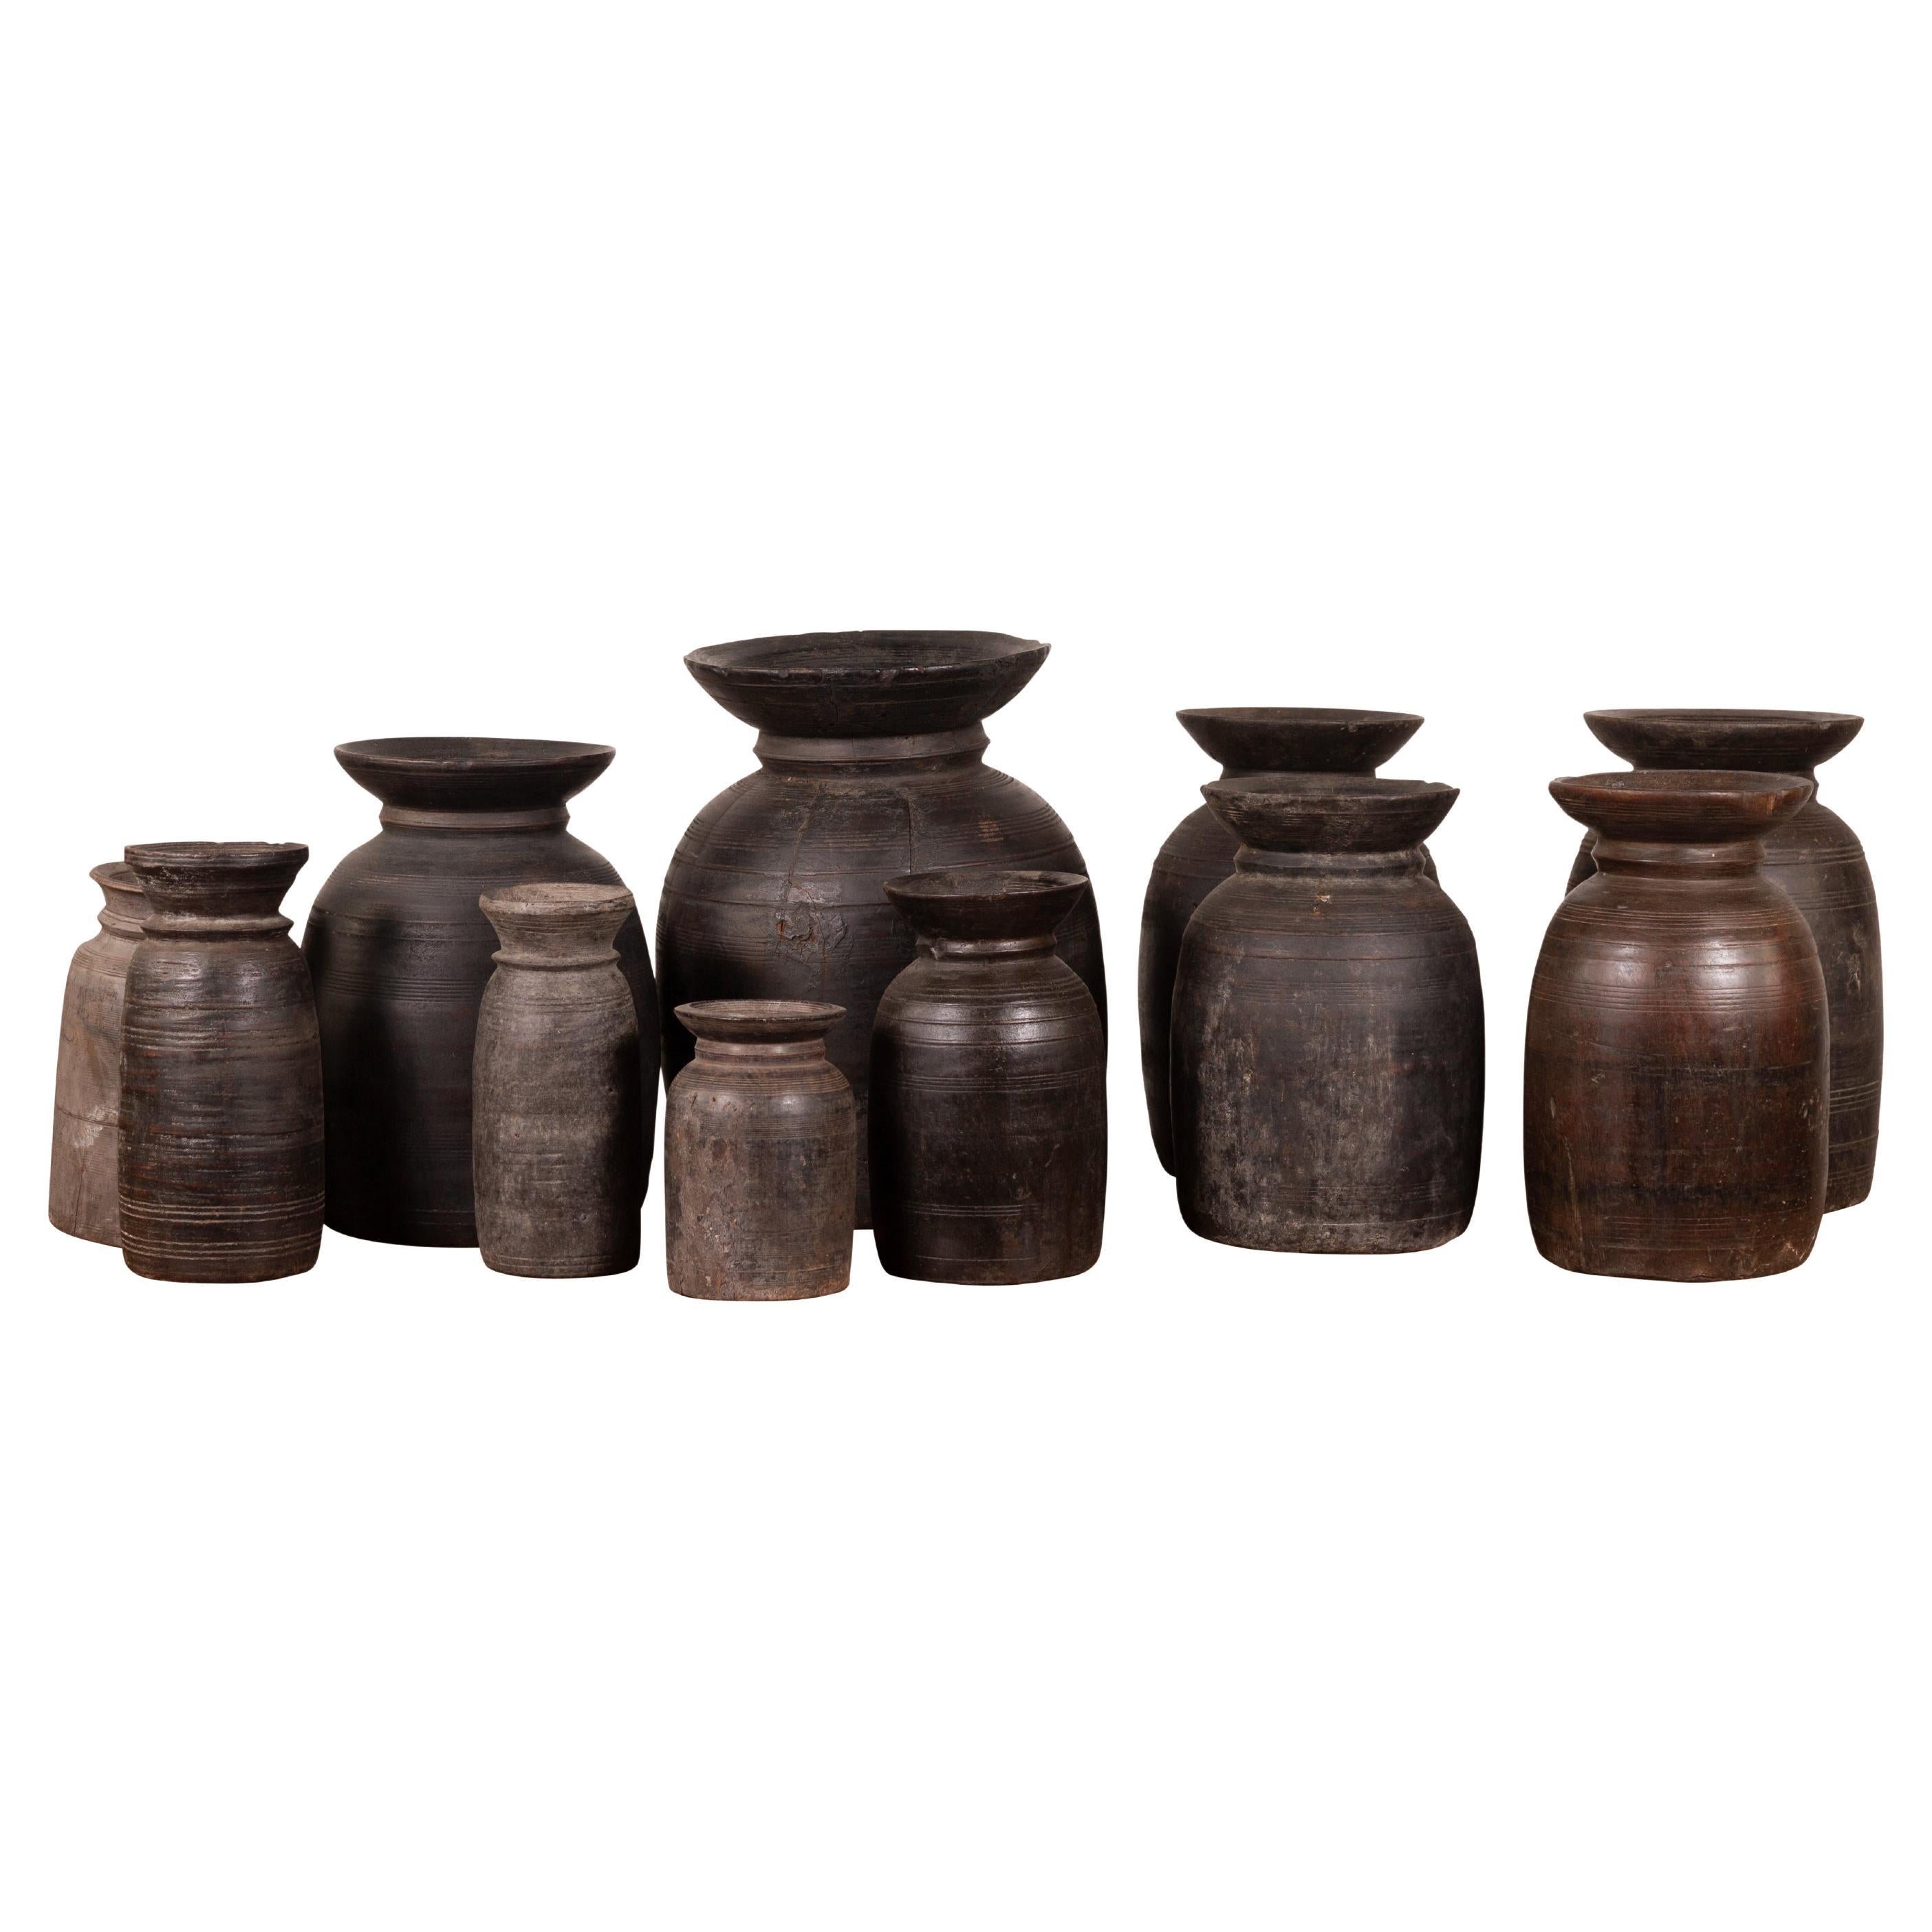 Nepalese Rustic Wooden Ghee Pots Sold in Sets of Three or Five